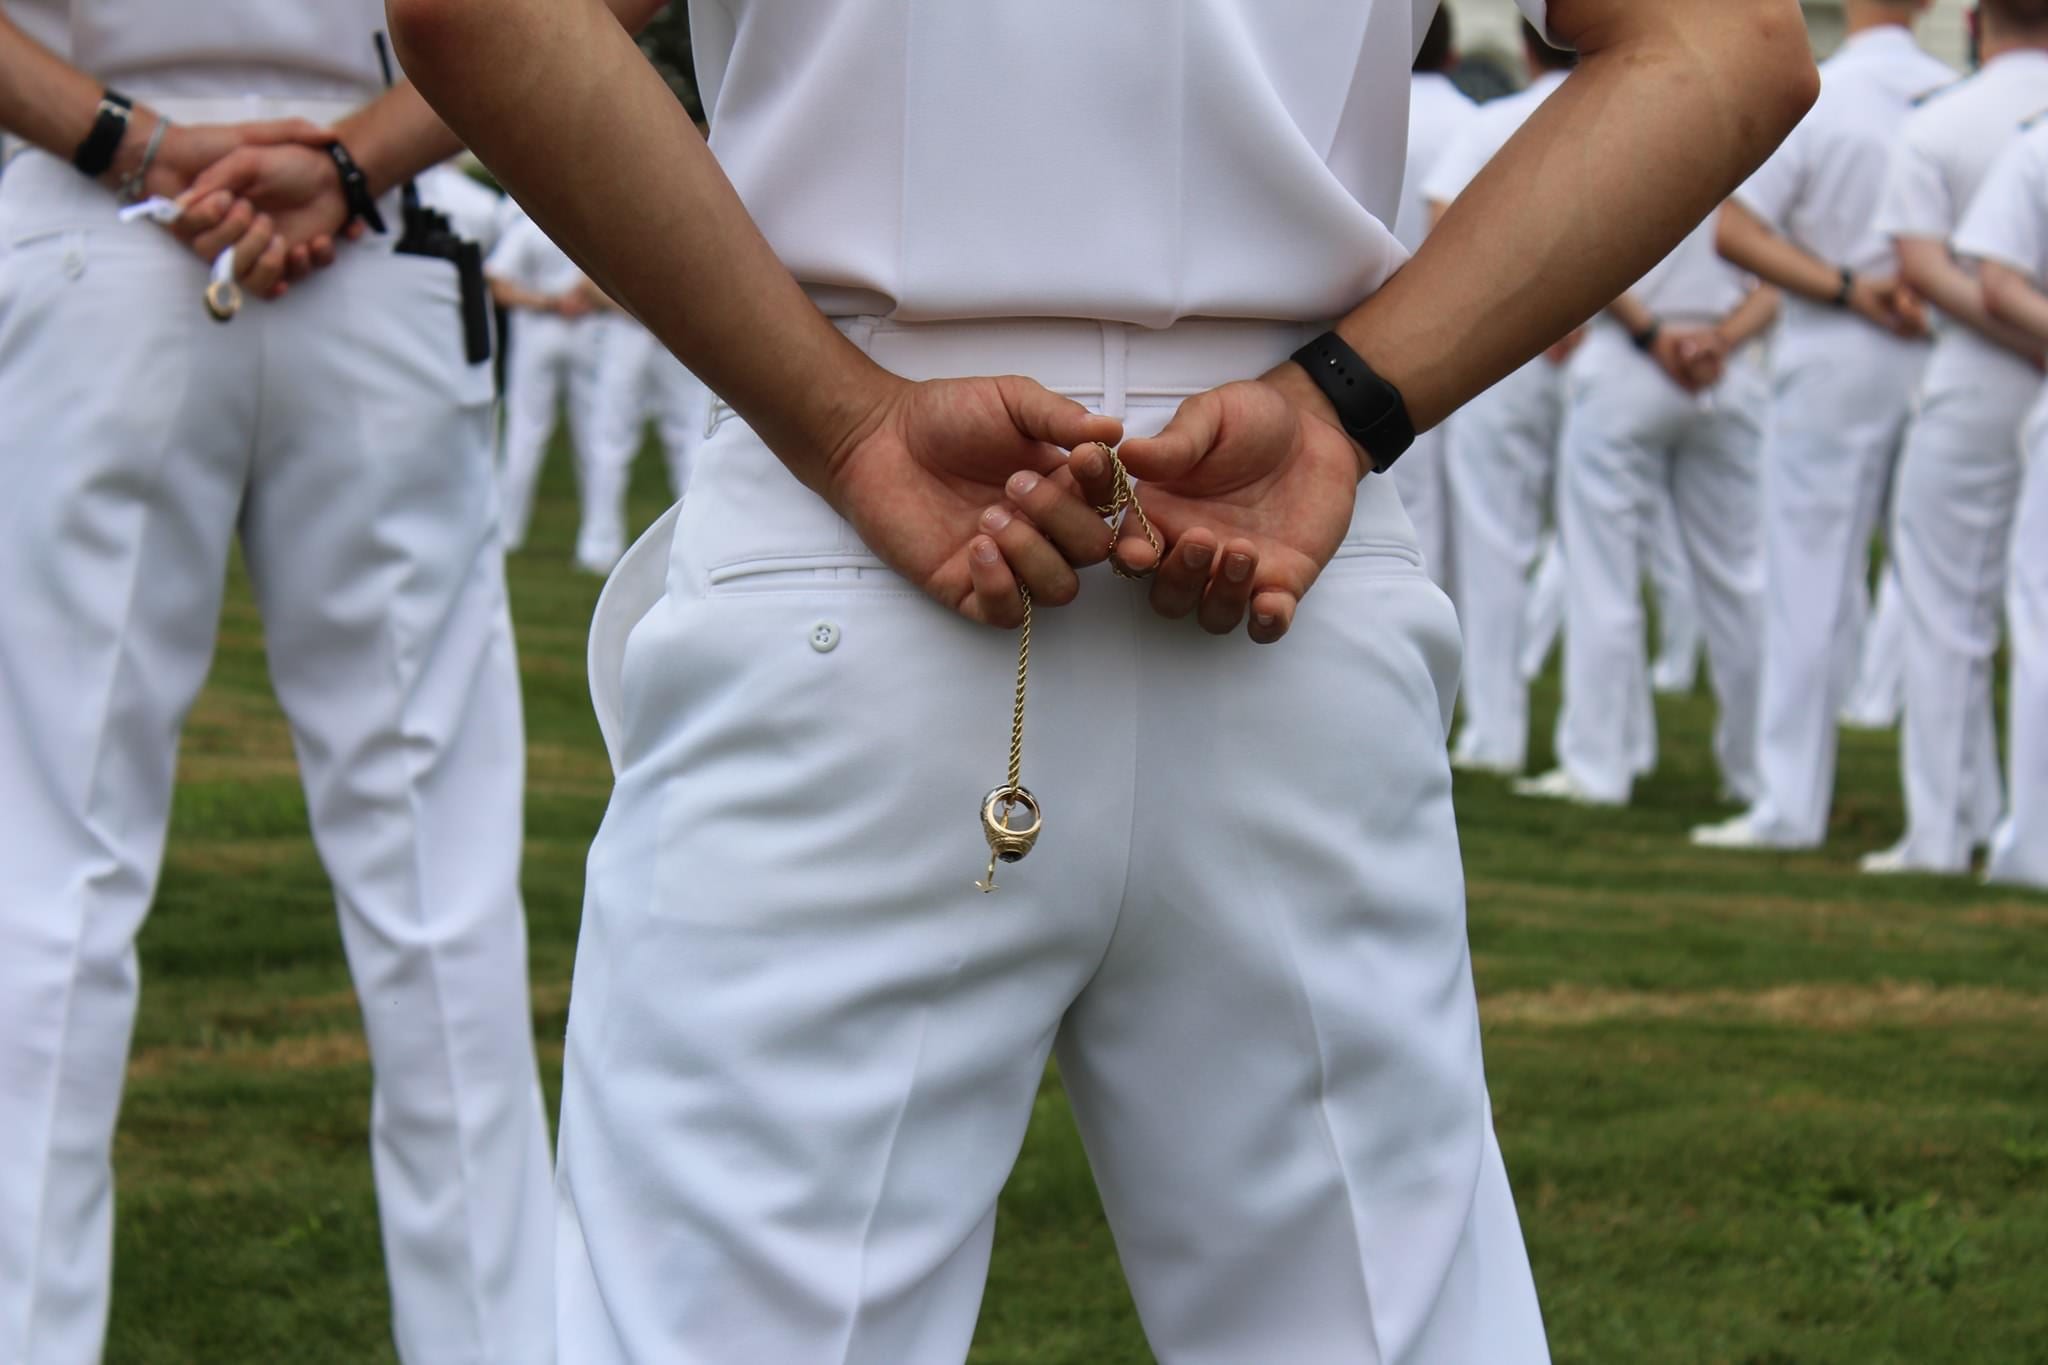 Photo Of USMMA Midshipman With Class Ring